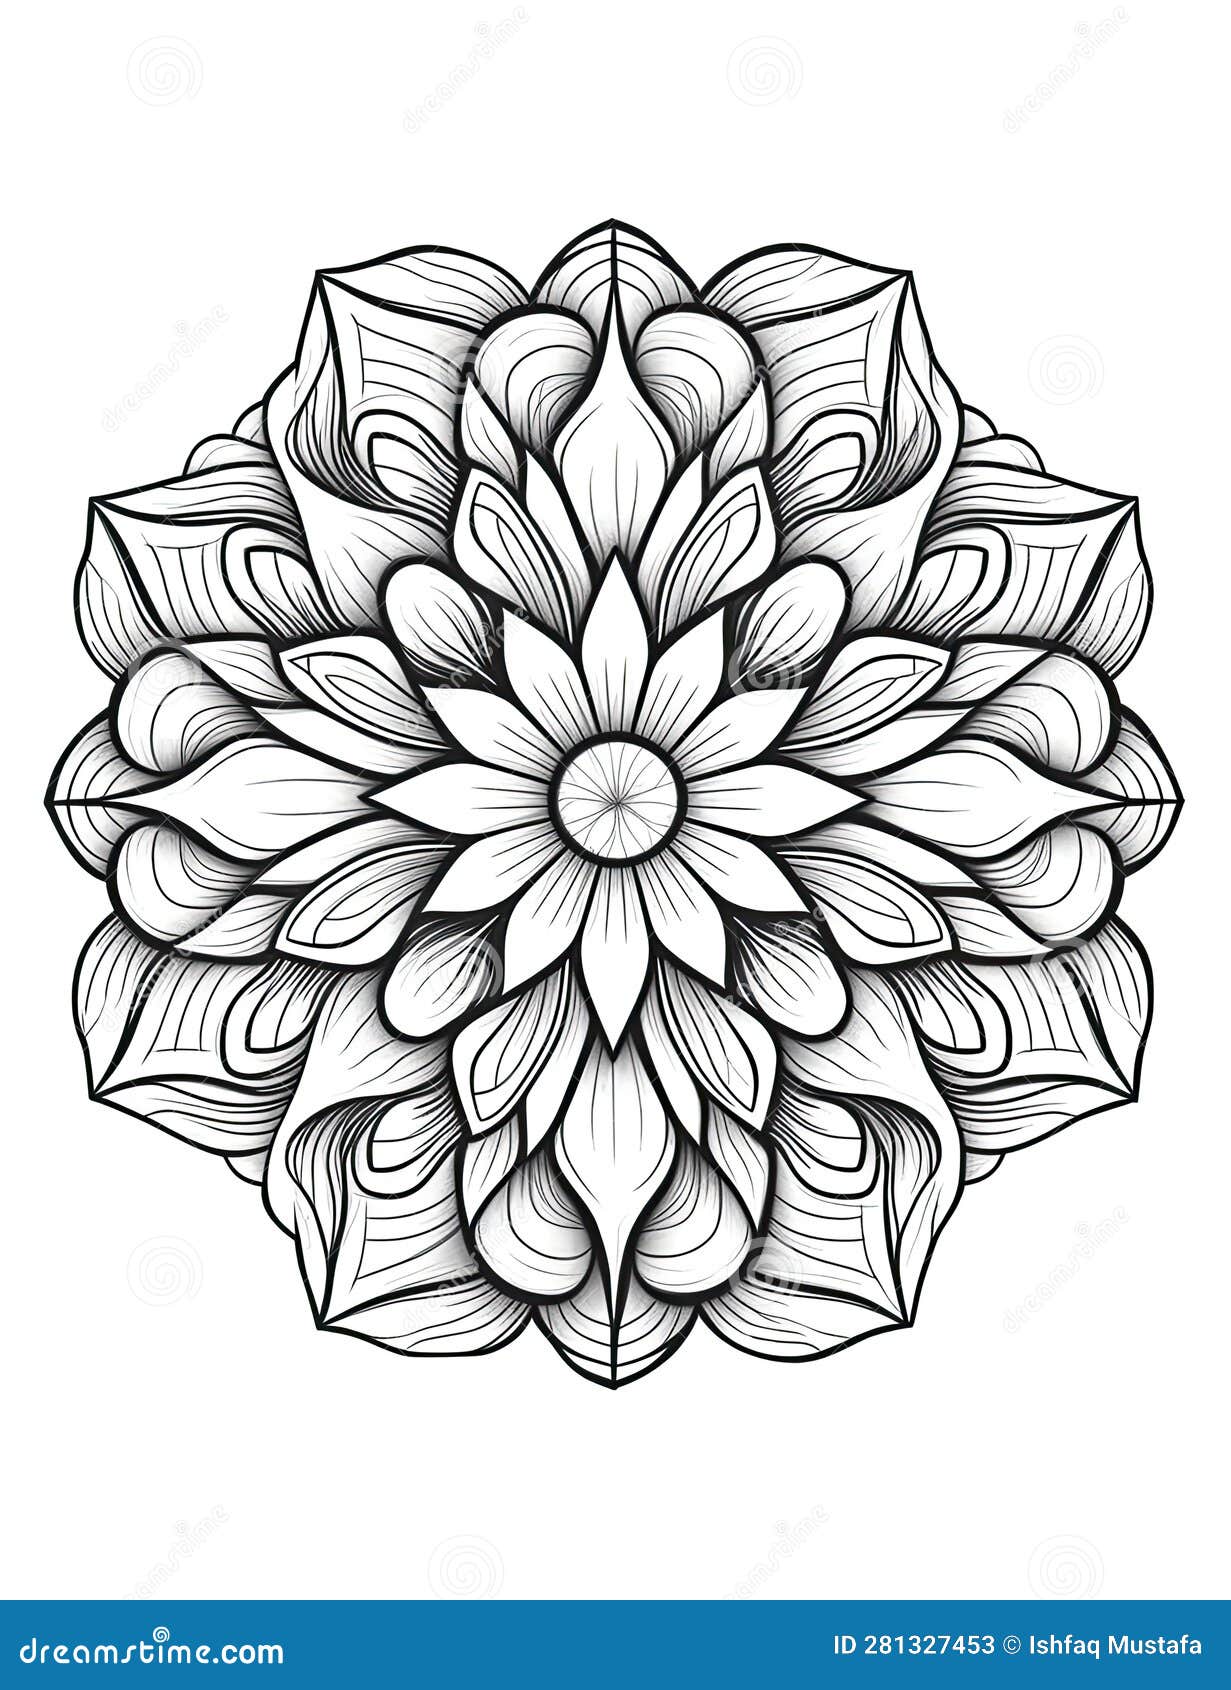 Mandala coloring pages for adult creativity and stress relief stock illustration